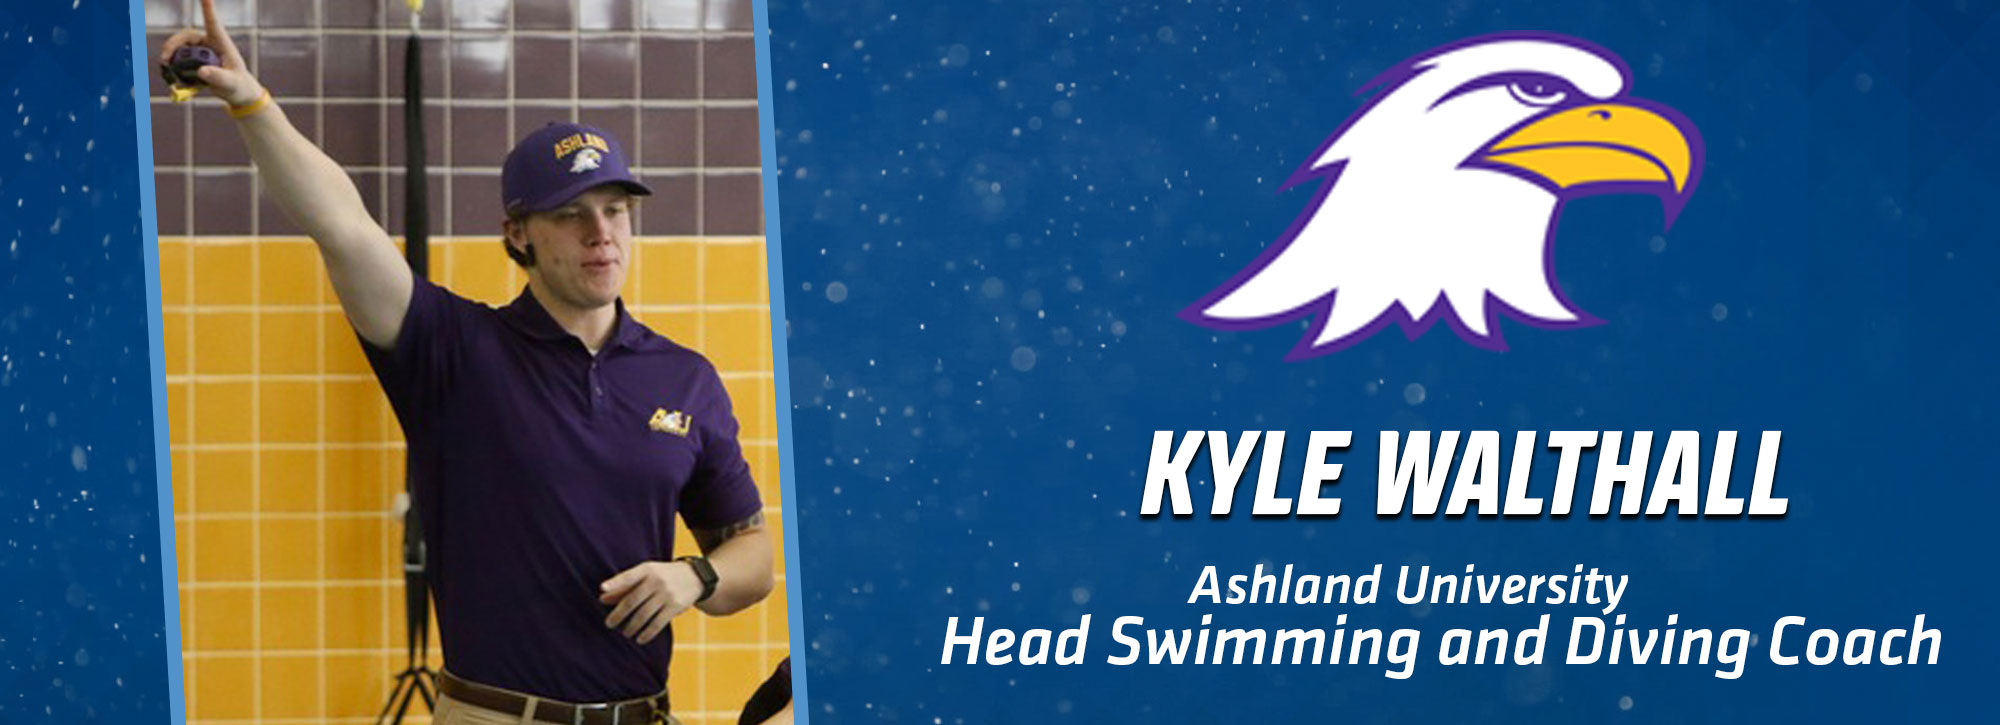 Ashland Promotes Walthall To Head Swimming & Diving Coach